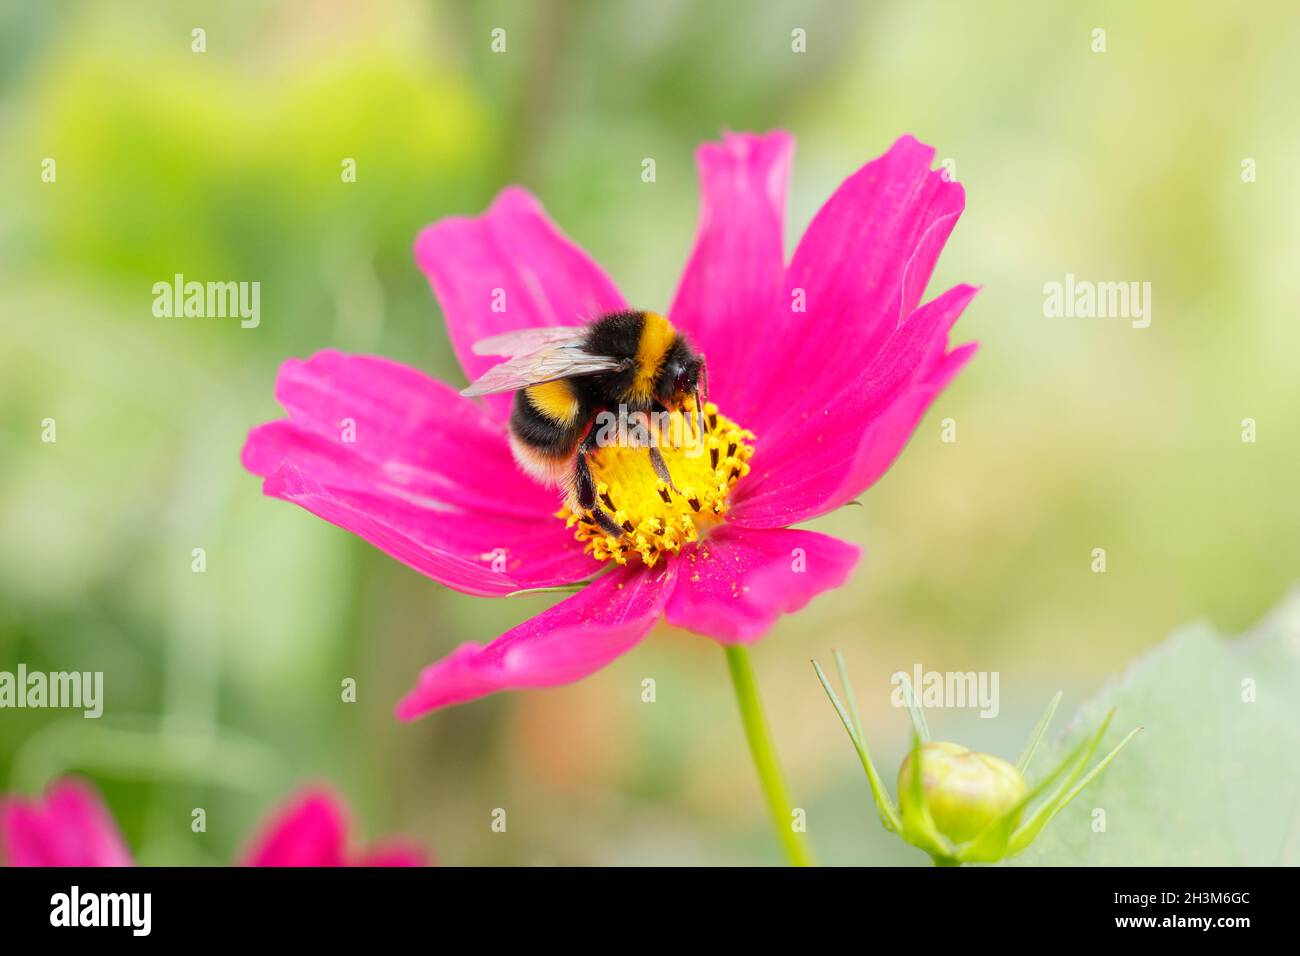 Bumble bee collecting collecting nectar and pollen on a cosmos flower. Bombos on Cosmos bipinnatus 'Candy stripe', Stock Photo